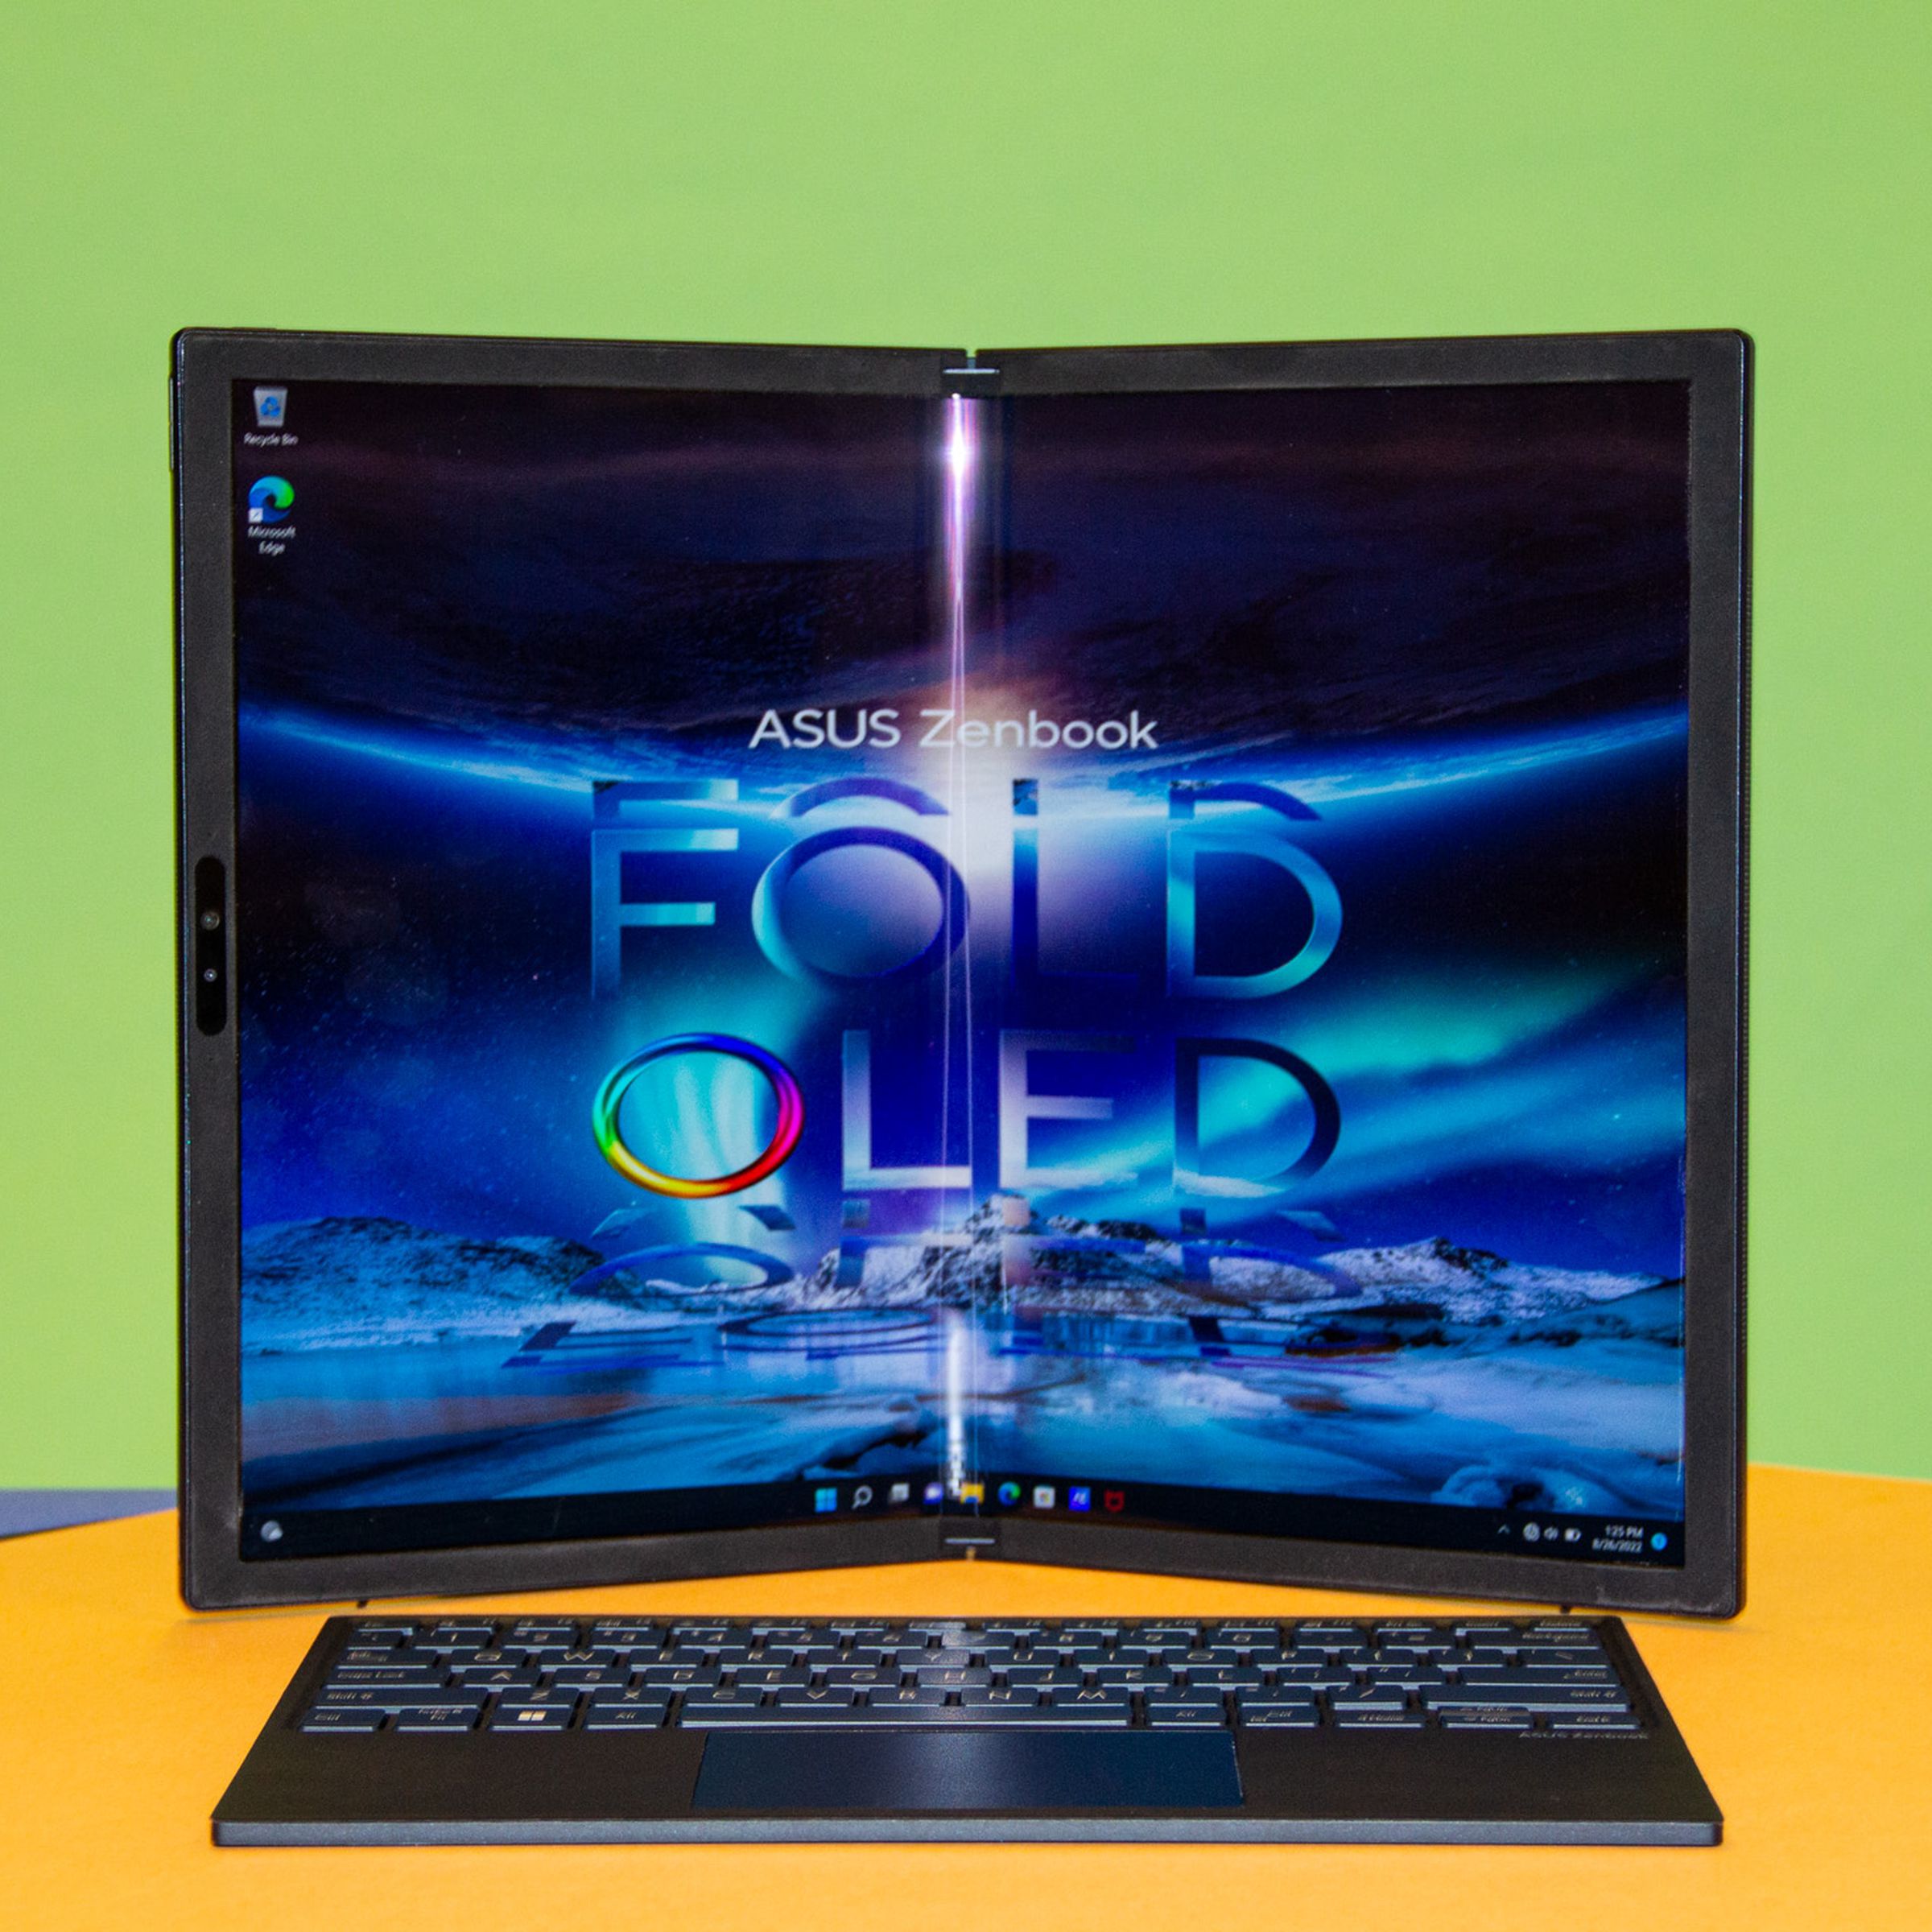 The Zenbook 17 Fold OLED in book mode with the keyboard in front. The screen displays the Asus Zenbook Fold OLED logo on a blue background.